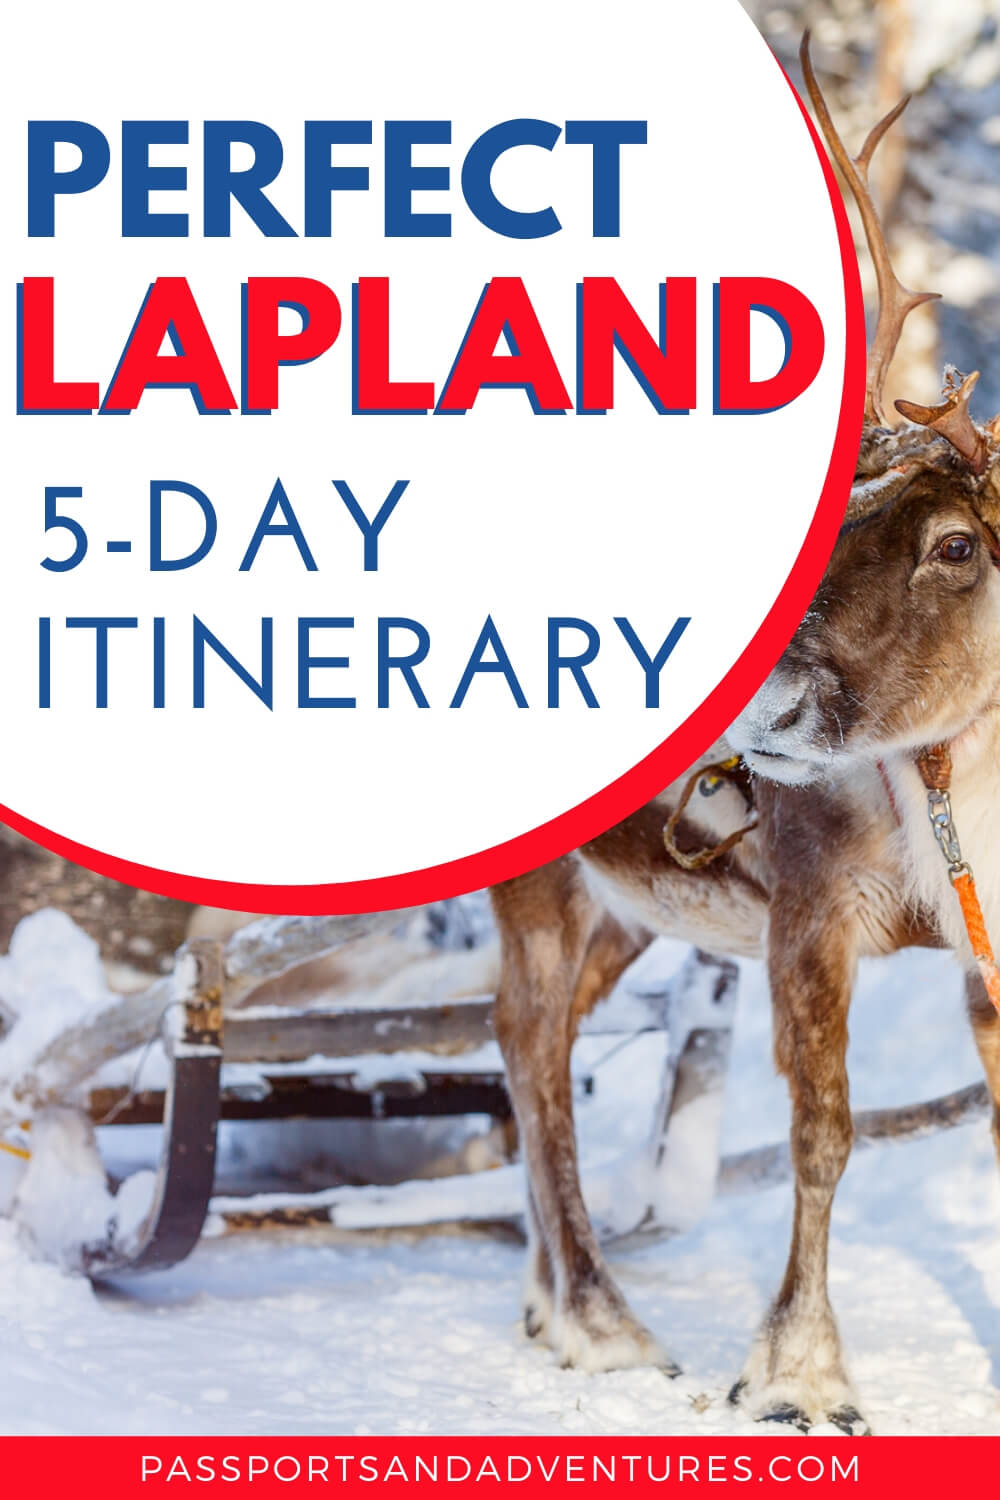 plan your own trip to lapland